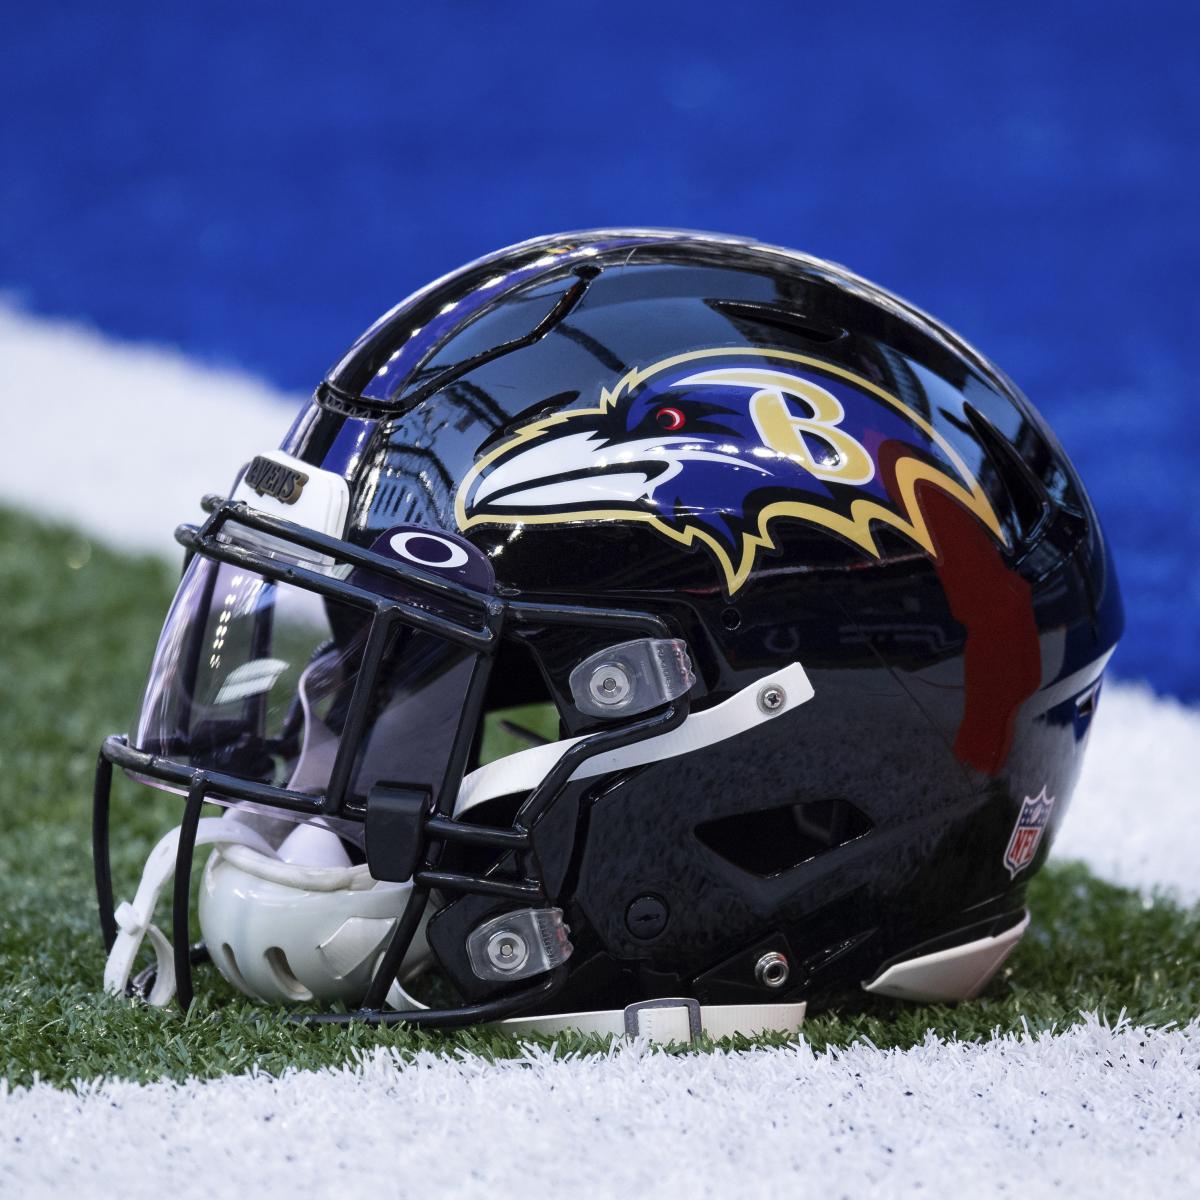 Report: 'A Group' of Ravens Unhappy with NFL over Handling of Steelers Game